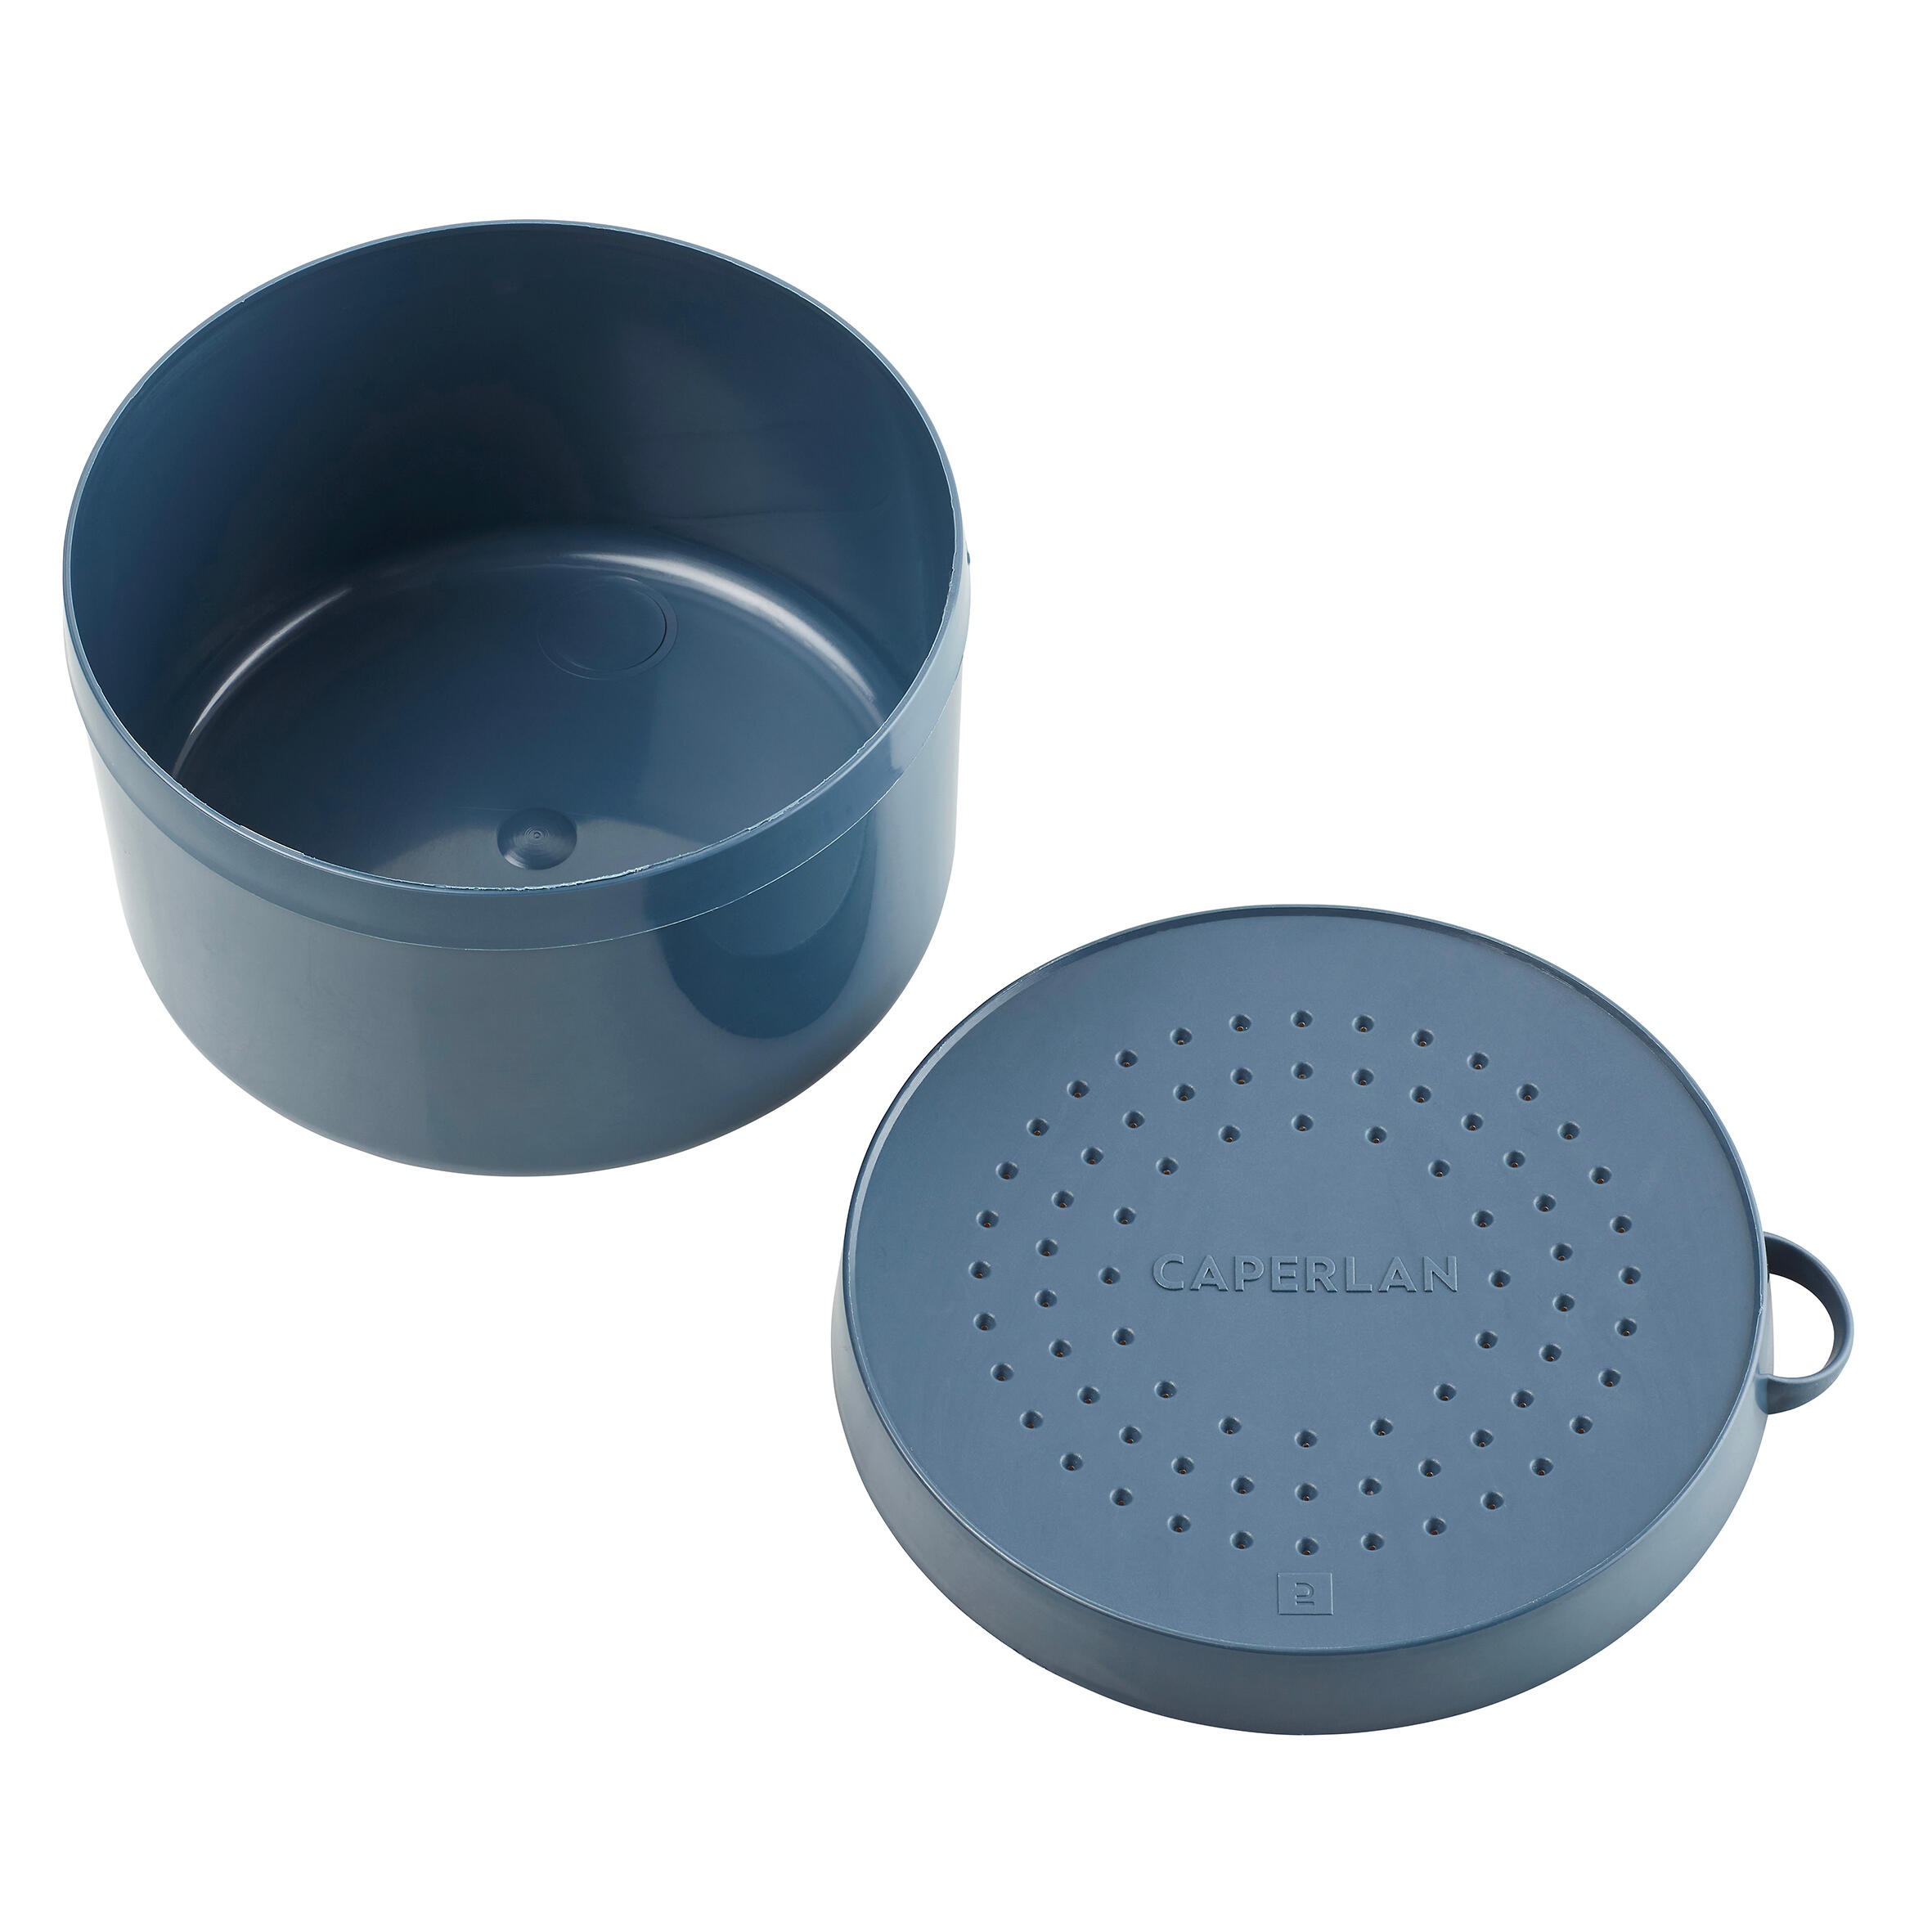 ROUND BAIT BOX DIAMETER WITH A LID WITH HOLES 100MM LVB 0.5 L 2/4